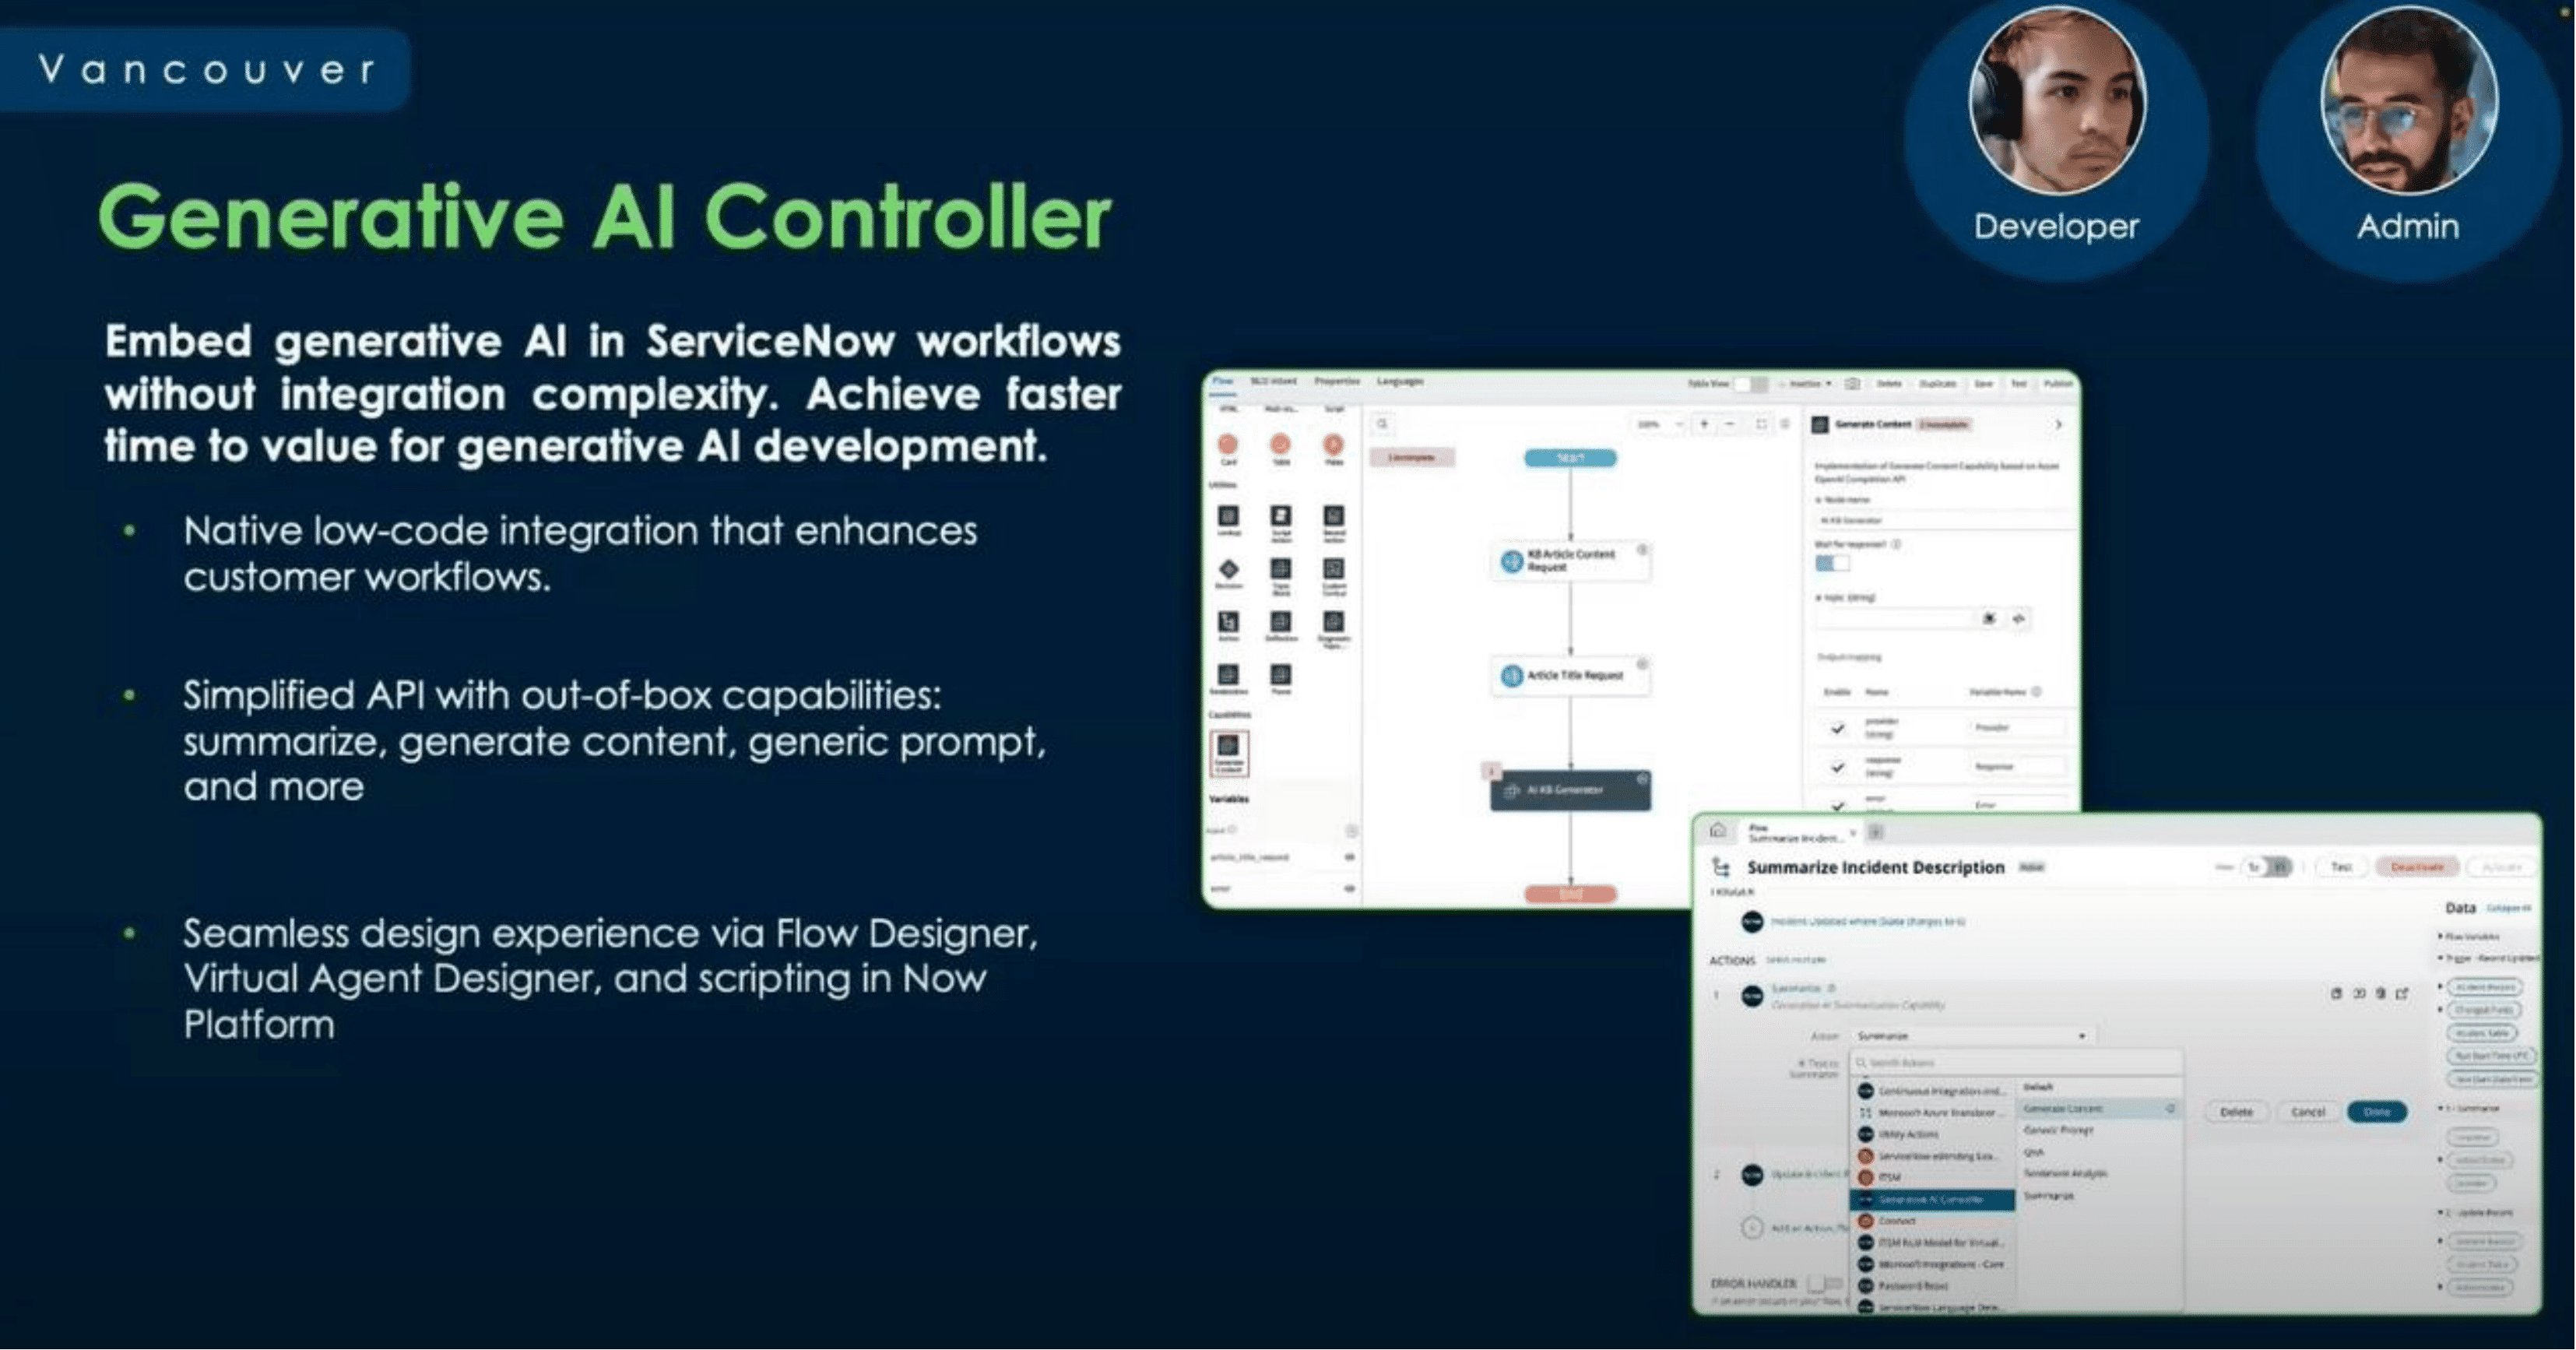 3 Top Out-of-the-Box Capabilities of Generative AI Controller on ServiceNow-2